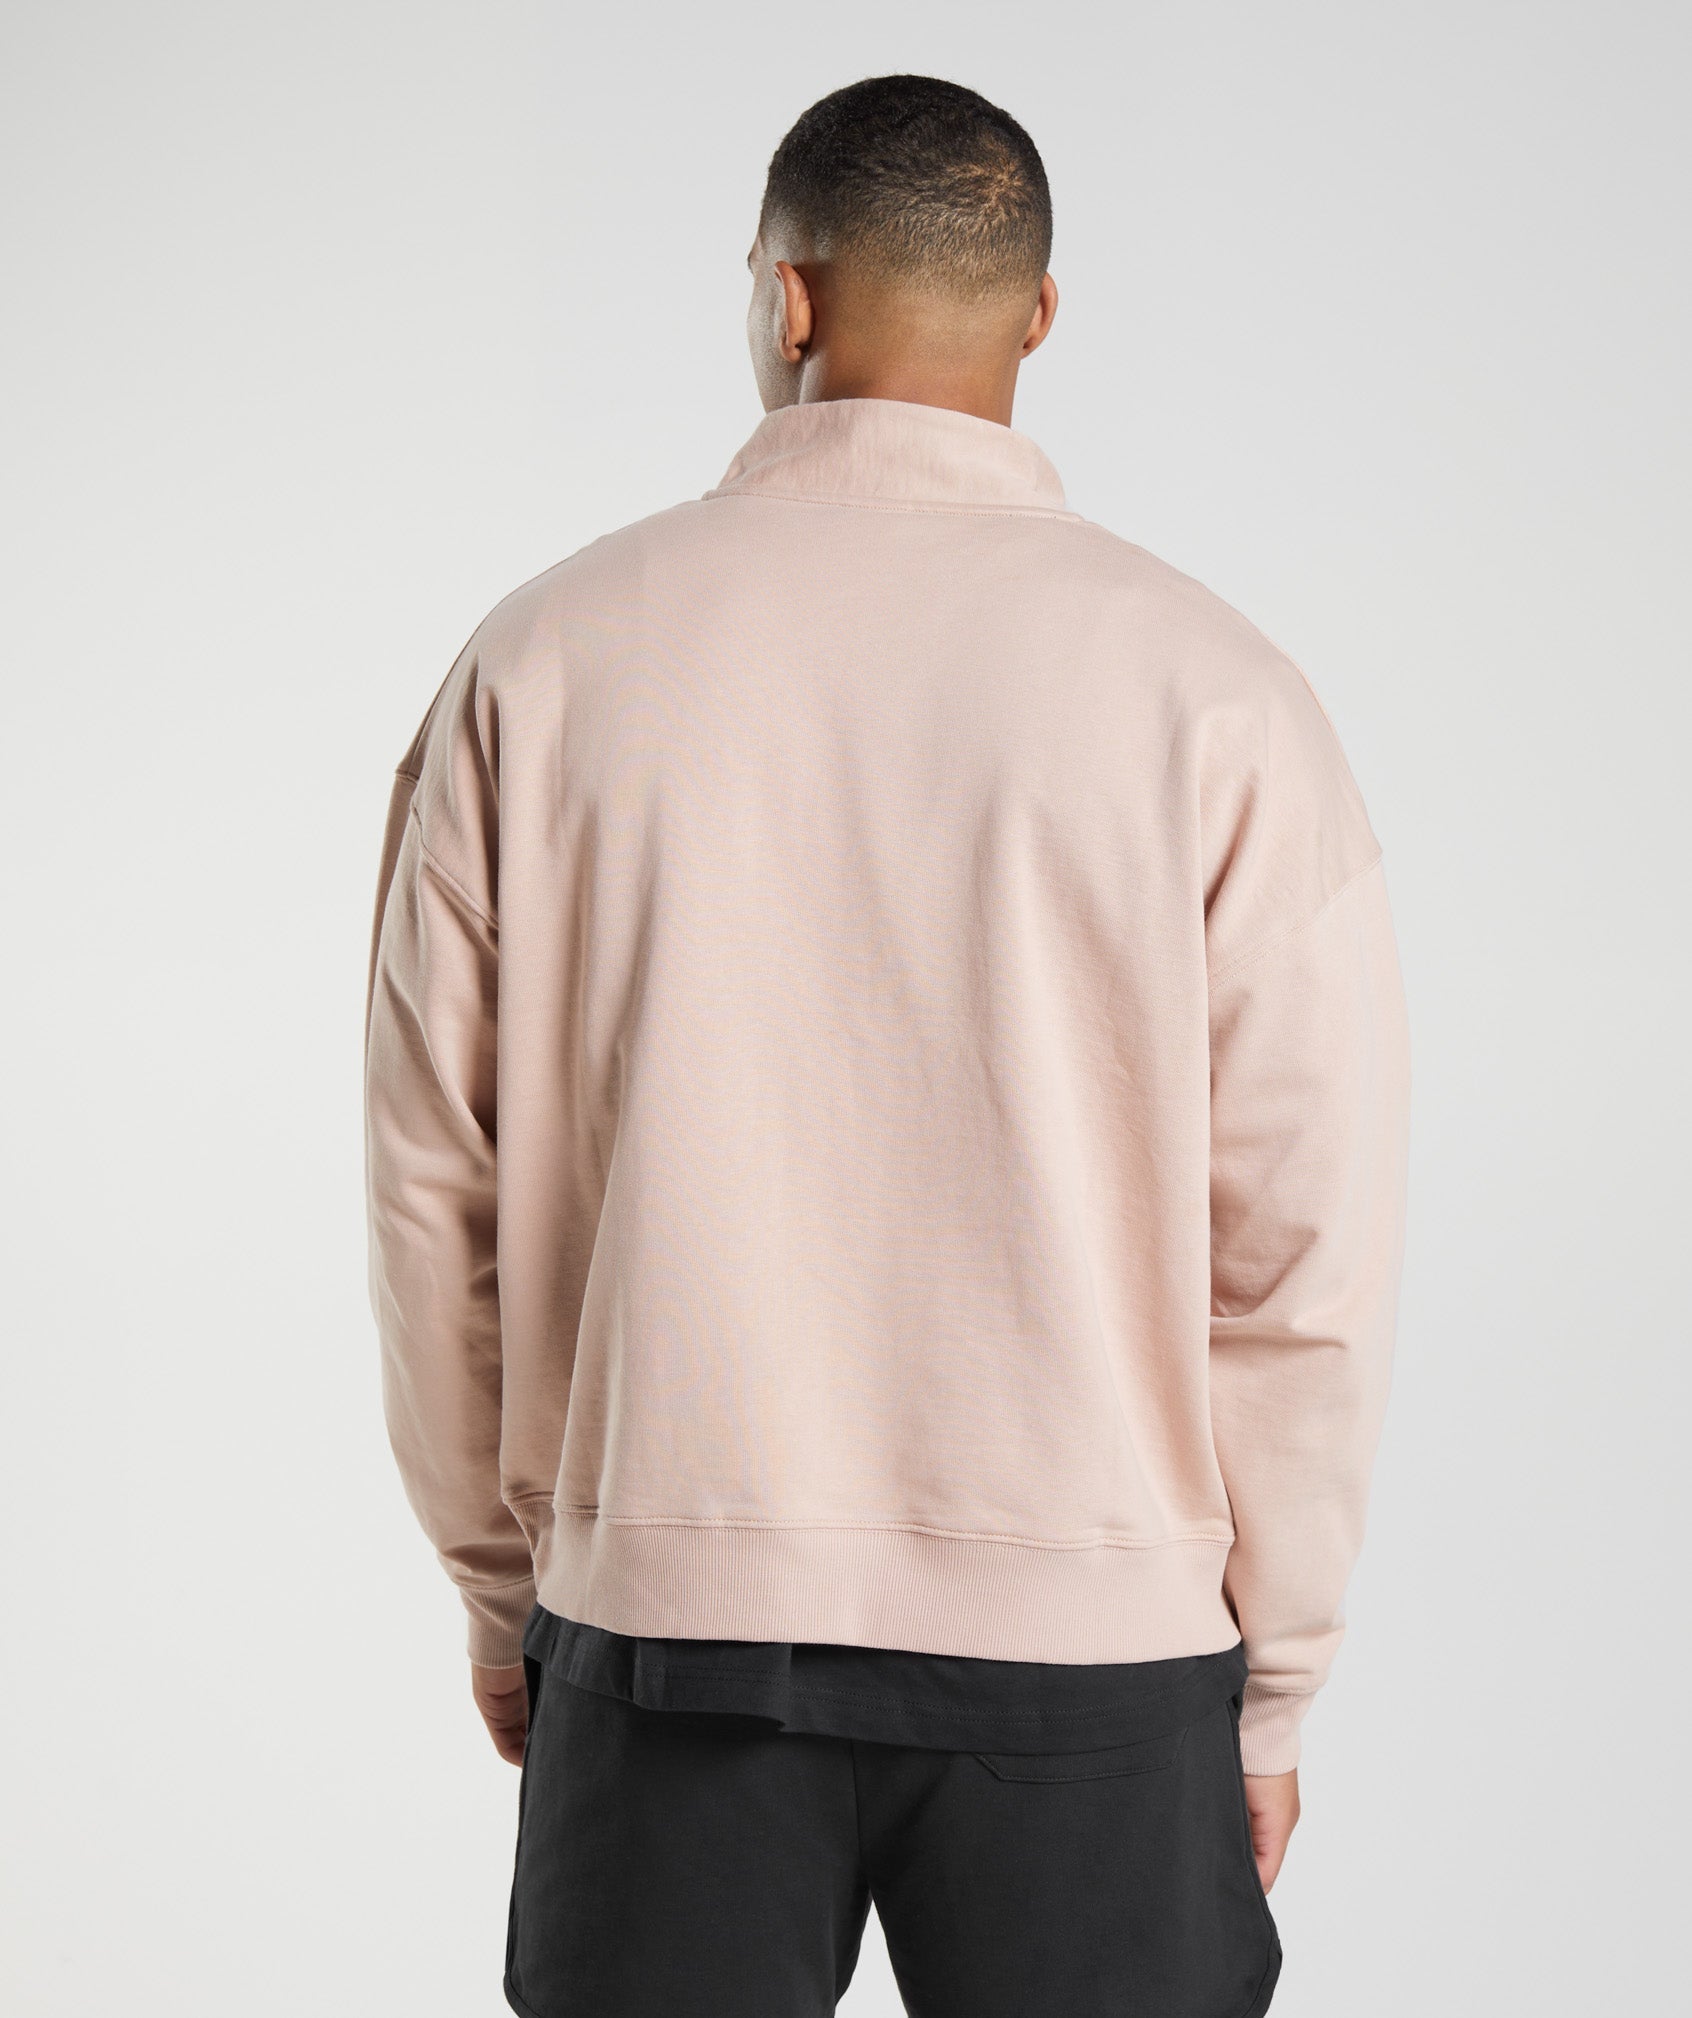 Rest Day Sweats 1/4 Zip in Dusty Taupe - view 3